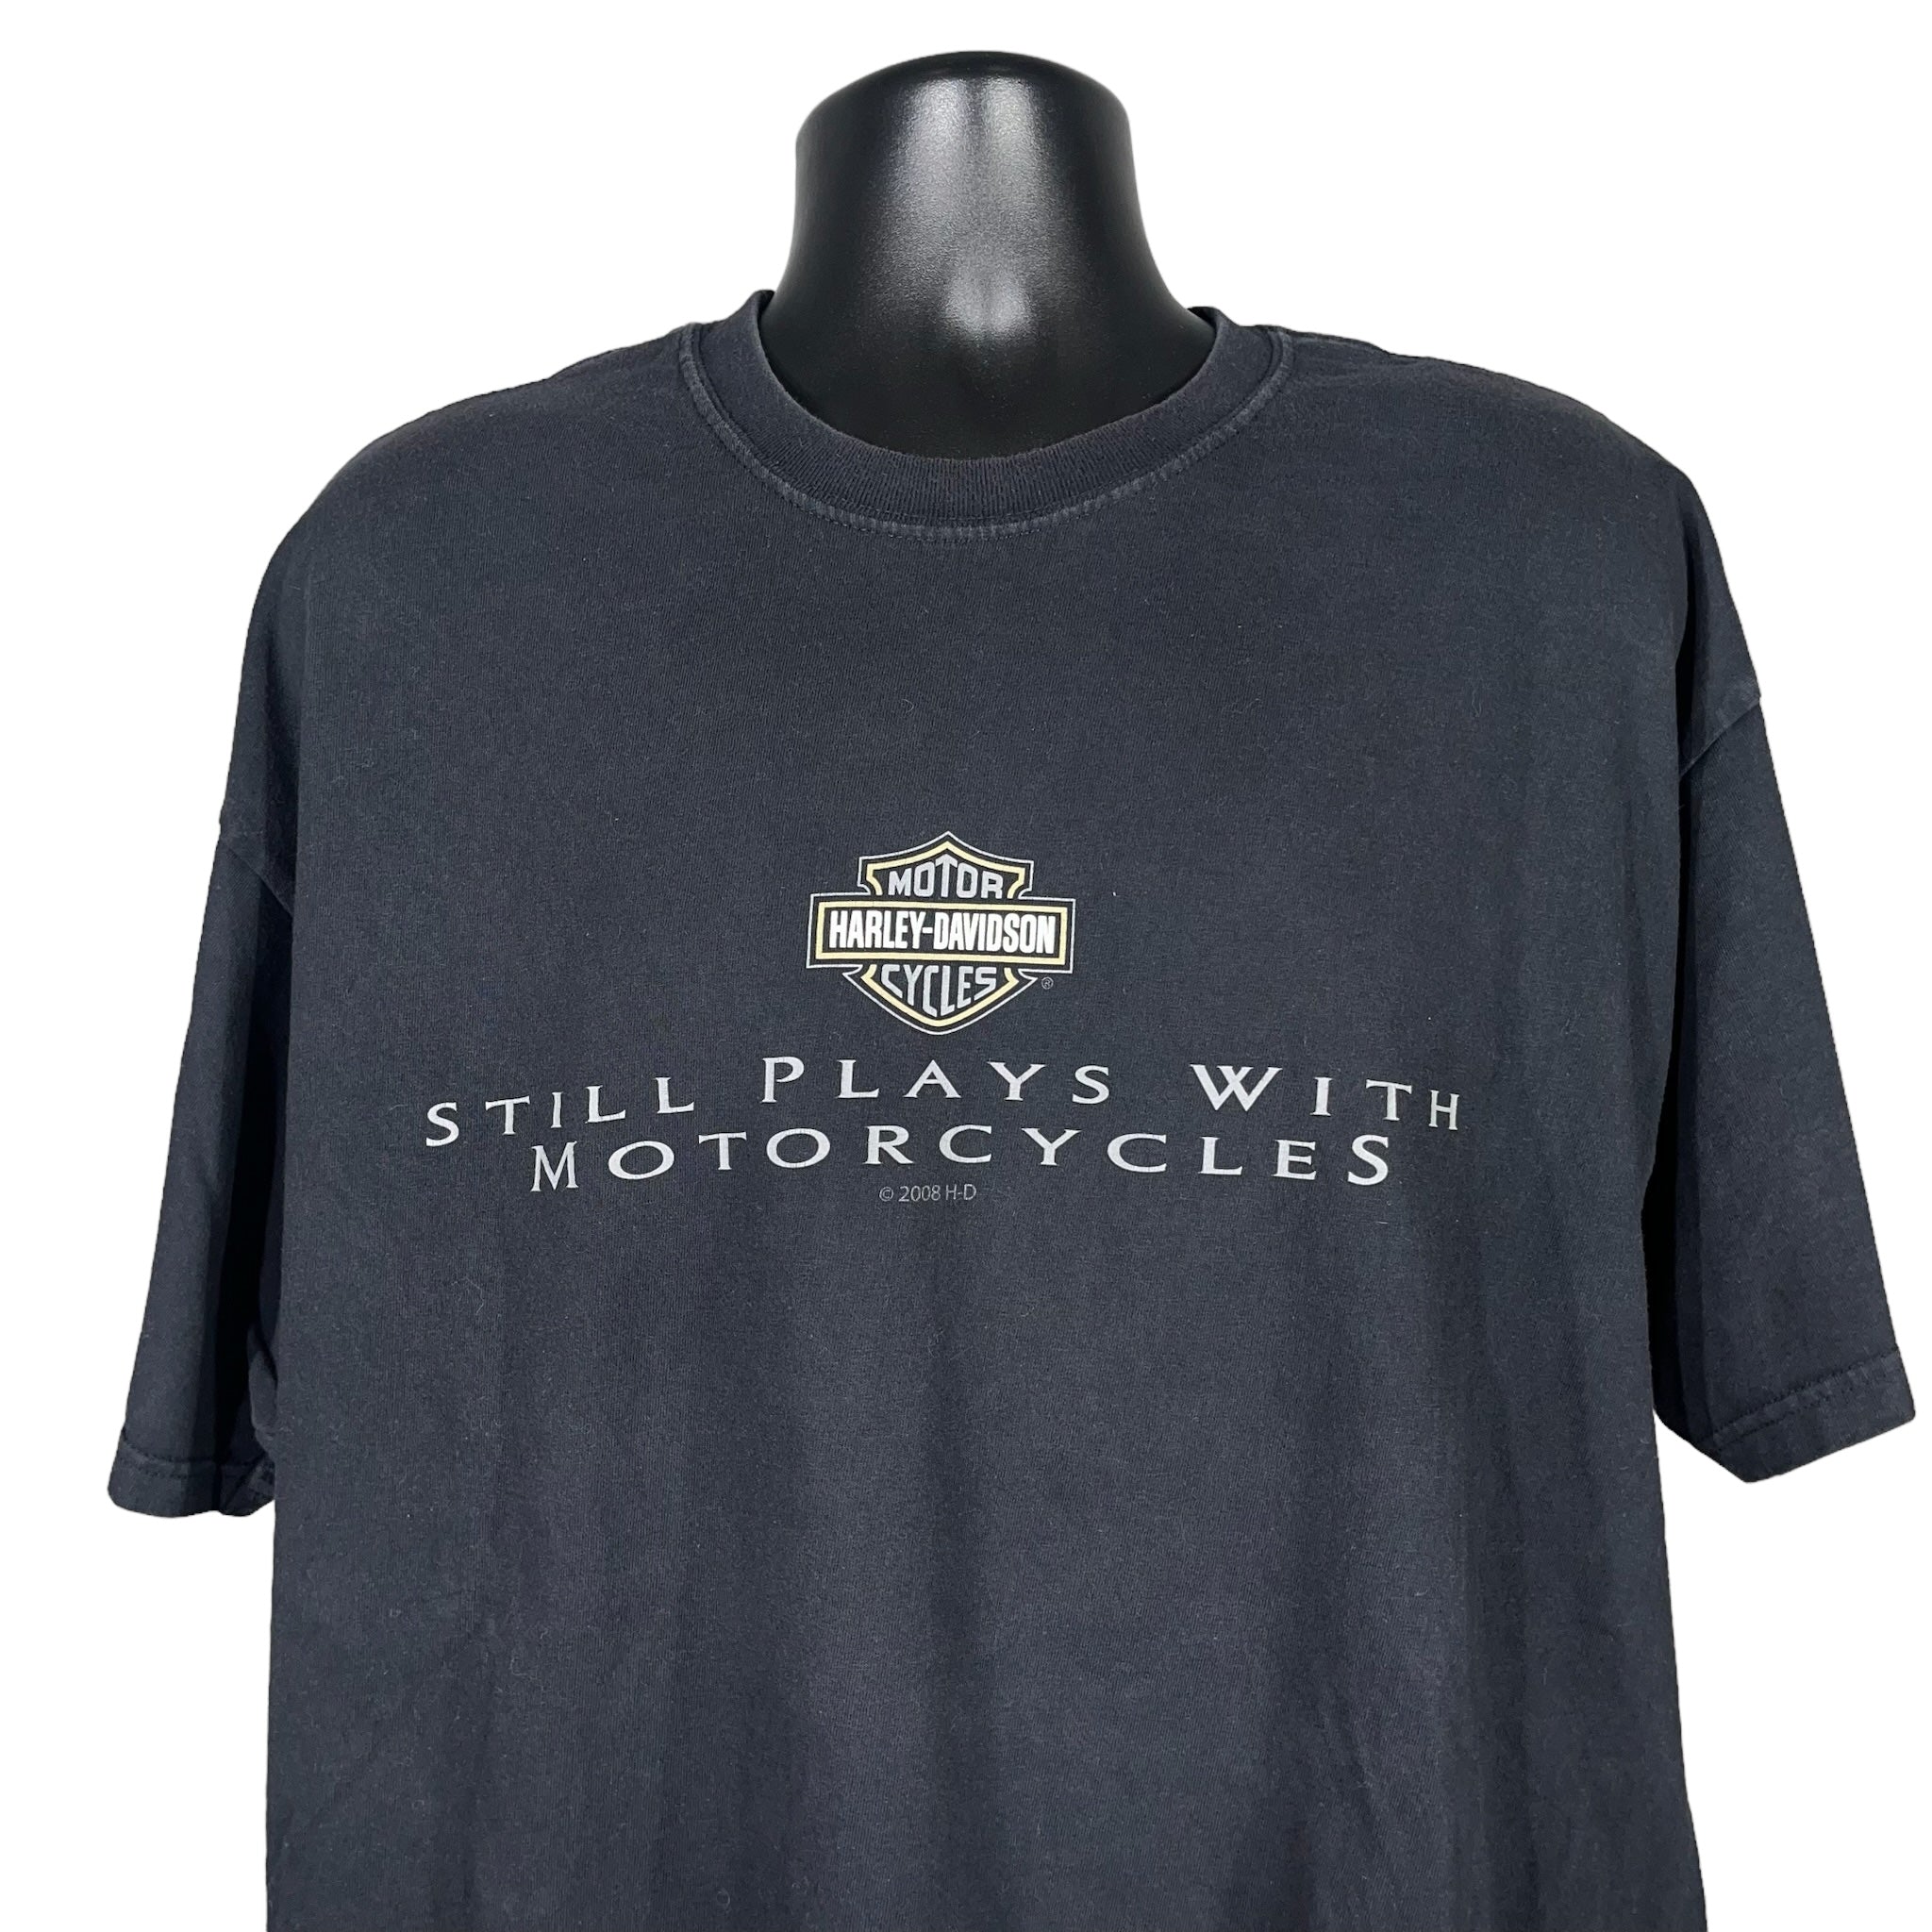 Harley Davidson "Still Play With Motorcycles" Tee